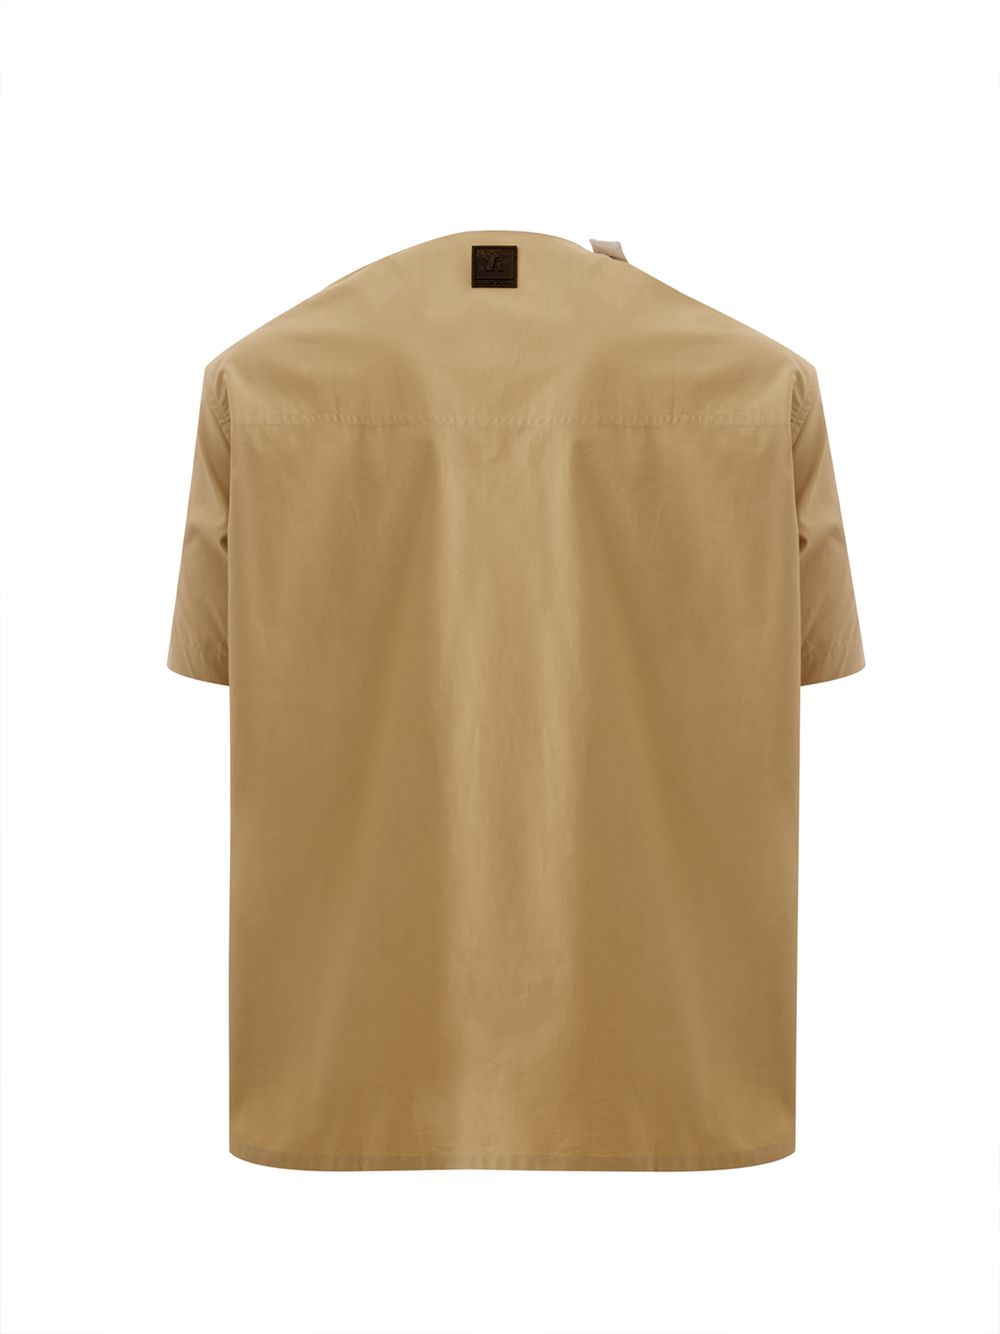 Emporio Armani Oversized Beige T-Shirt with Side Closure